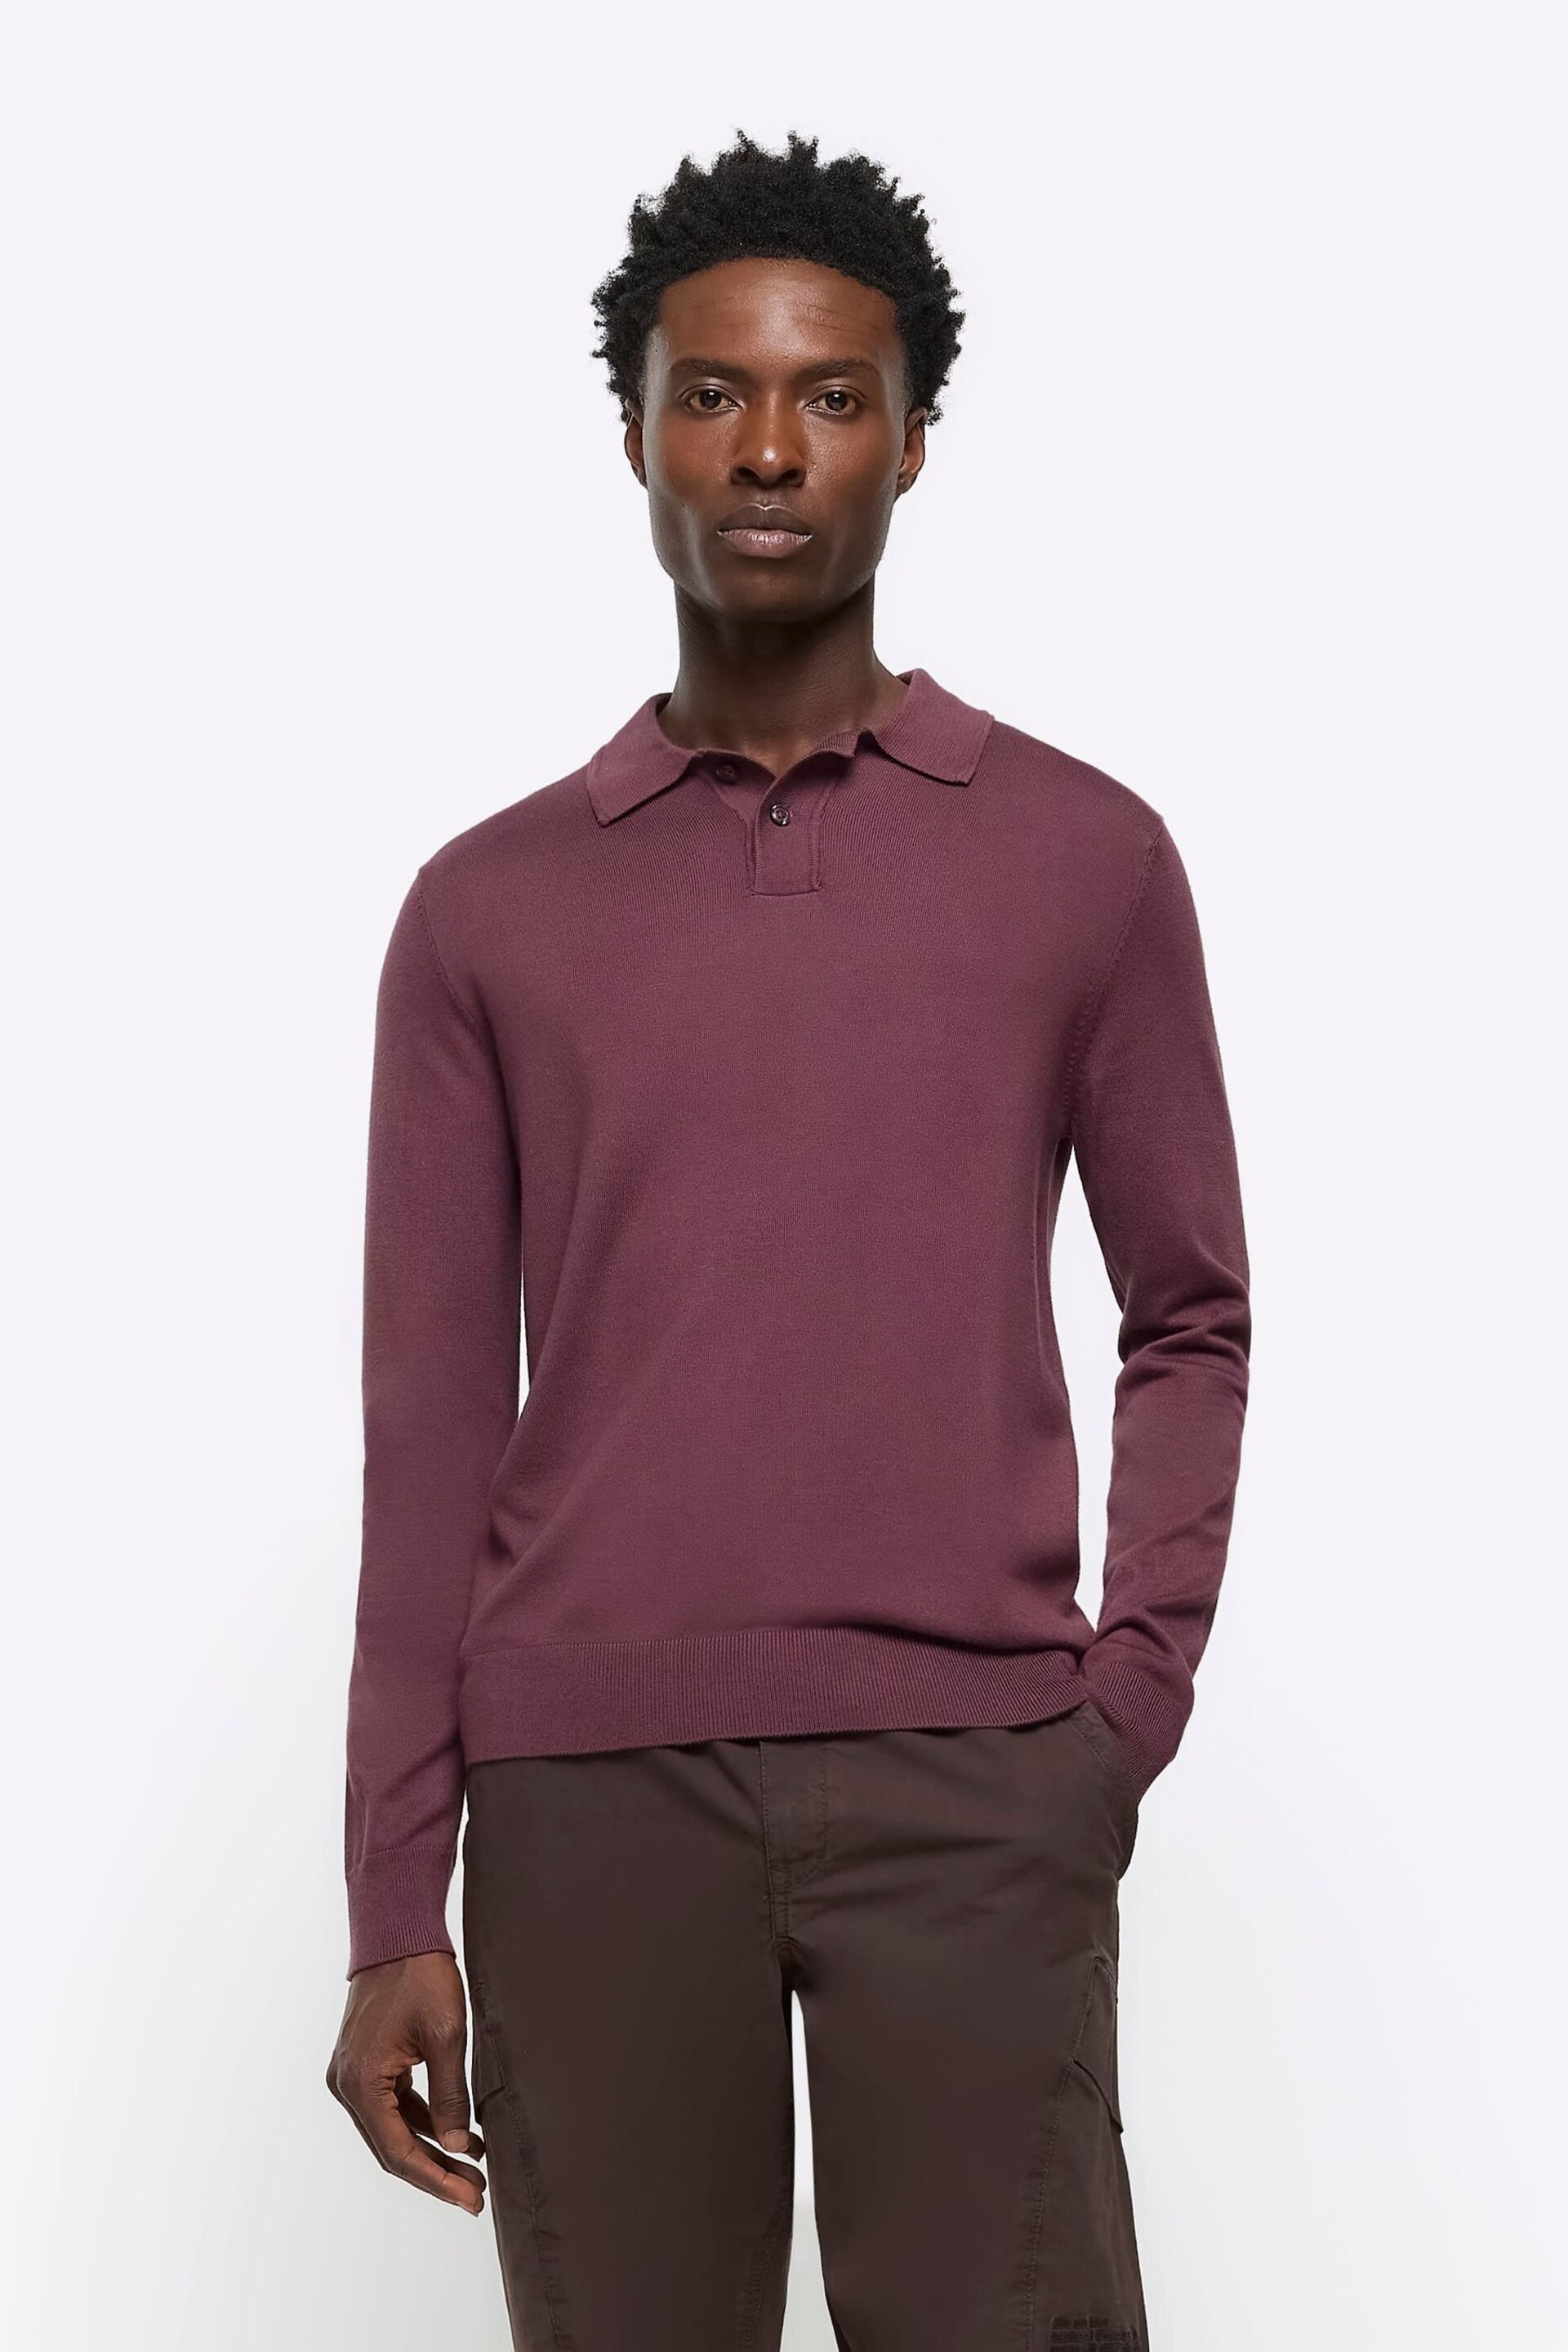 River Island Purple Knitted Polo Jumper - Image 1 of 6